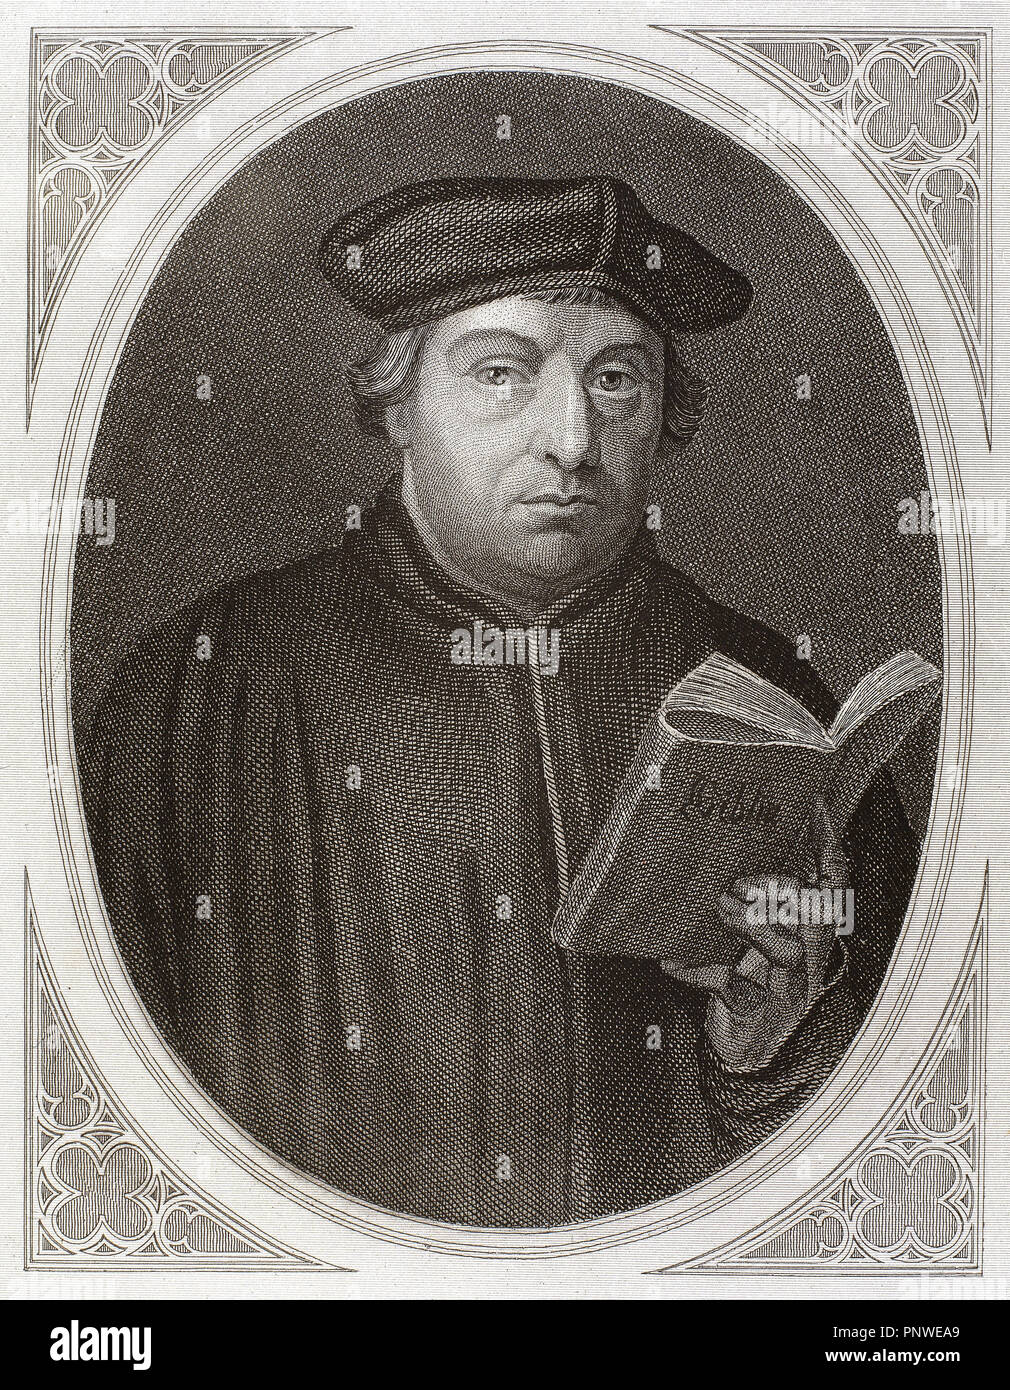 Martin Luther, (Eisleben, 1483, Eisleben, 1546). German reformer. Doctor of Theology and Augustinian priest. In 1517, outlined the main thesis of Lutheranism in Wittenberg. He was excommunicated in 1520. Engraving by J. Bastinos in 'The Religious Revolution' (1880). Stock Photo